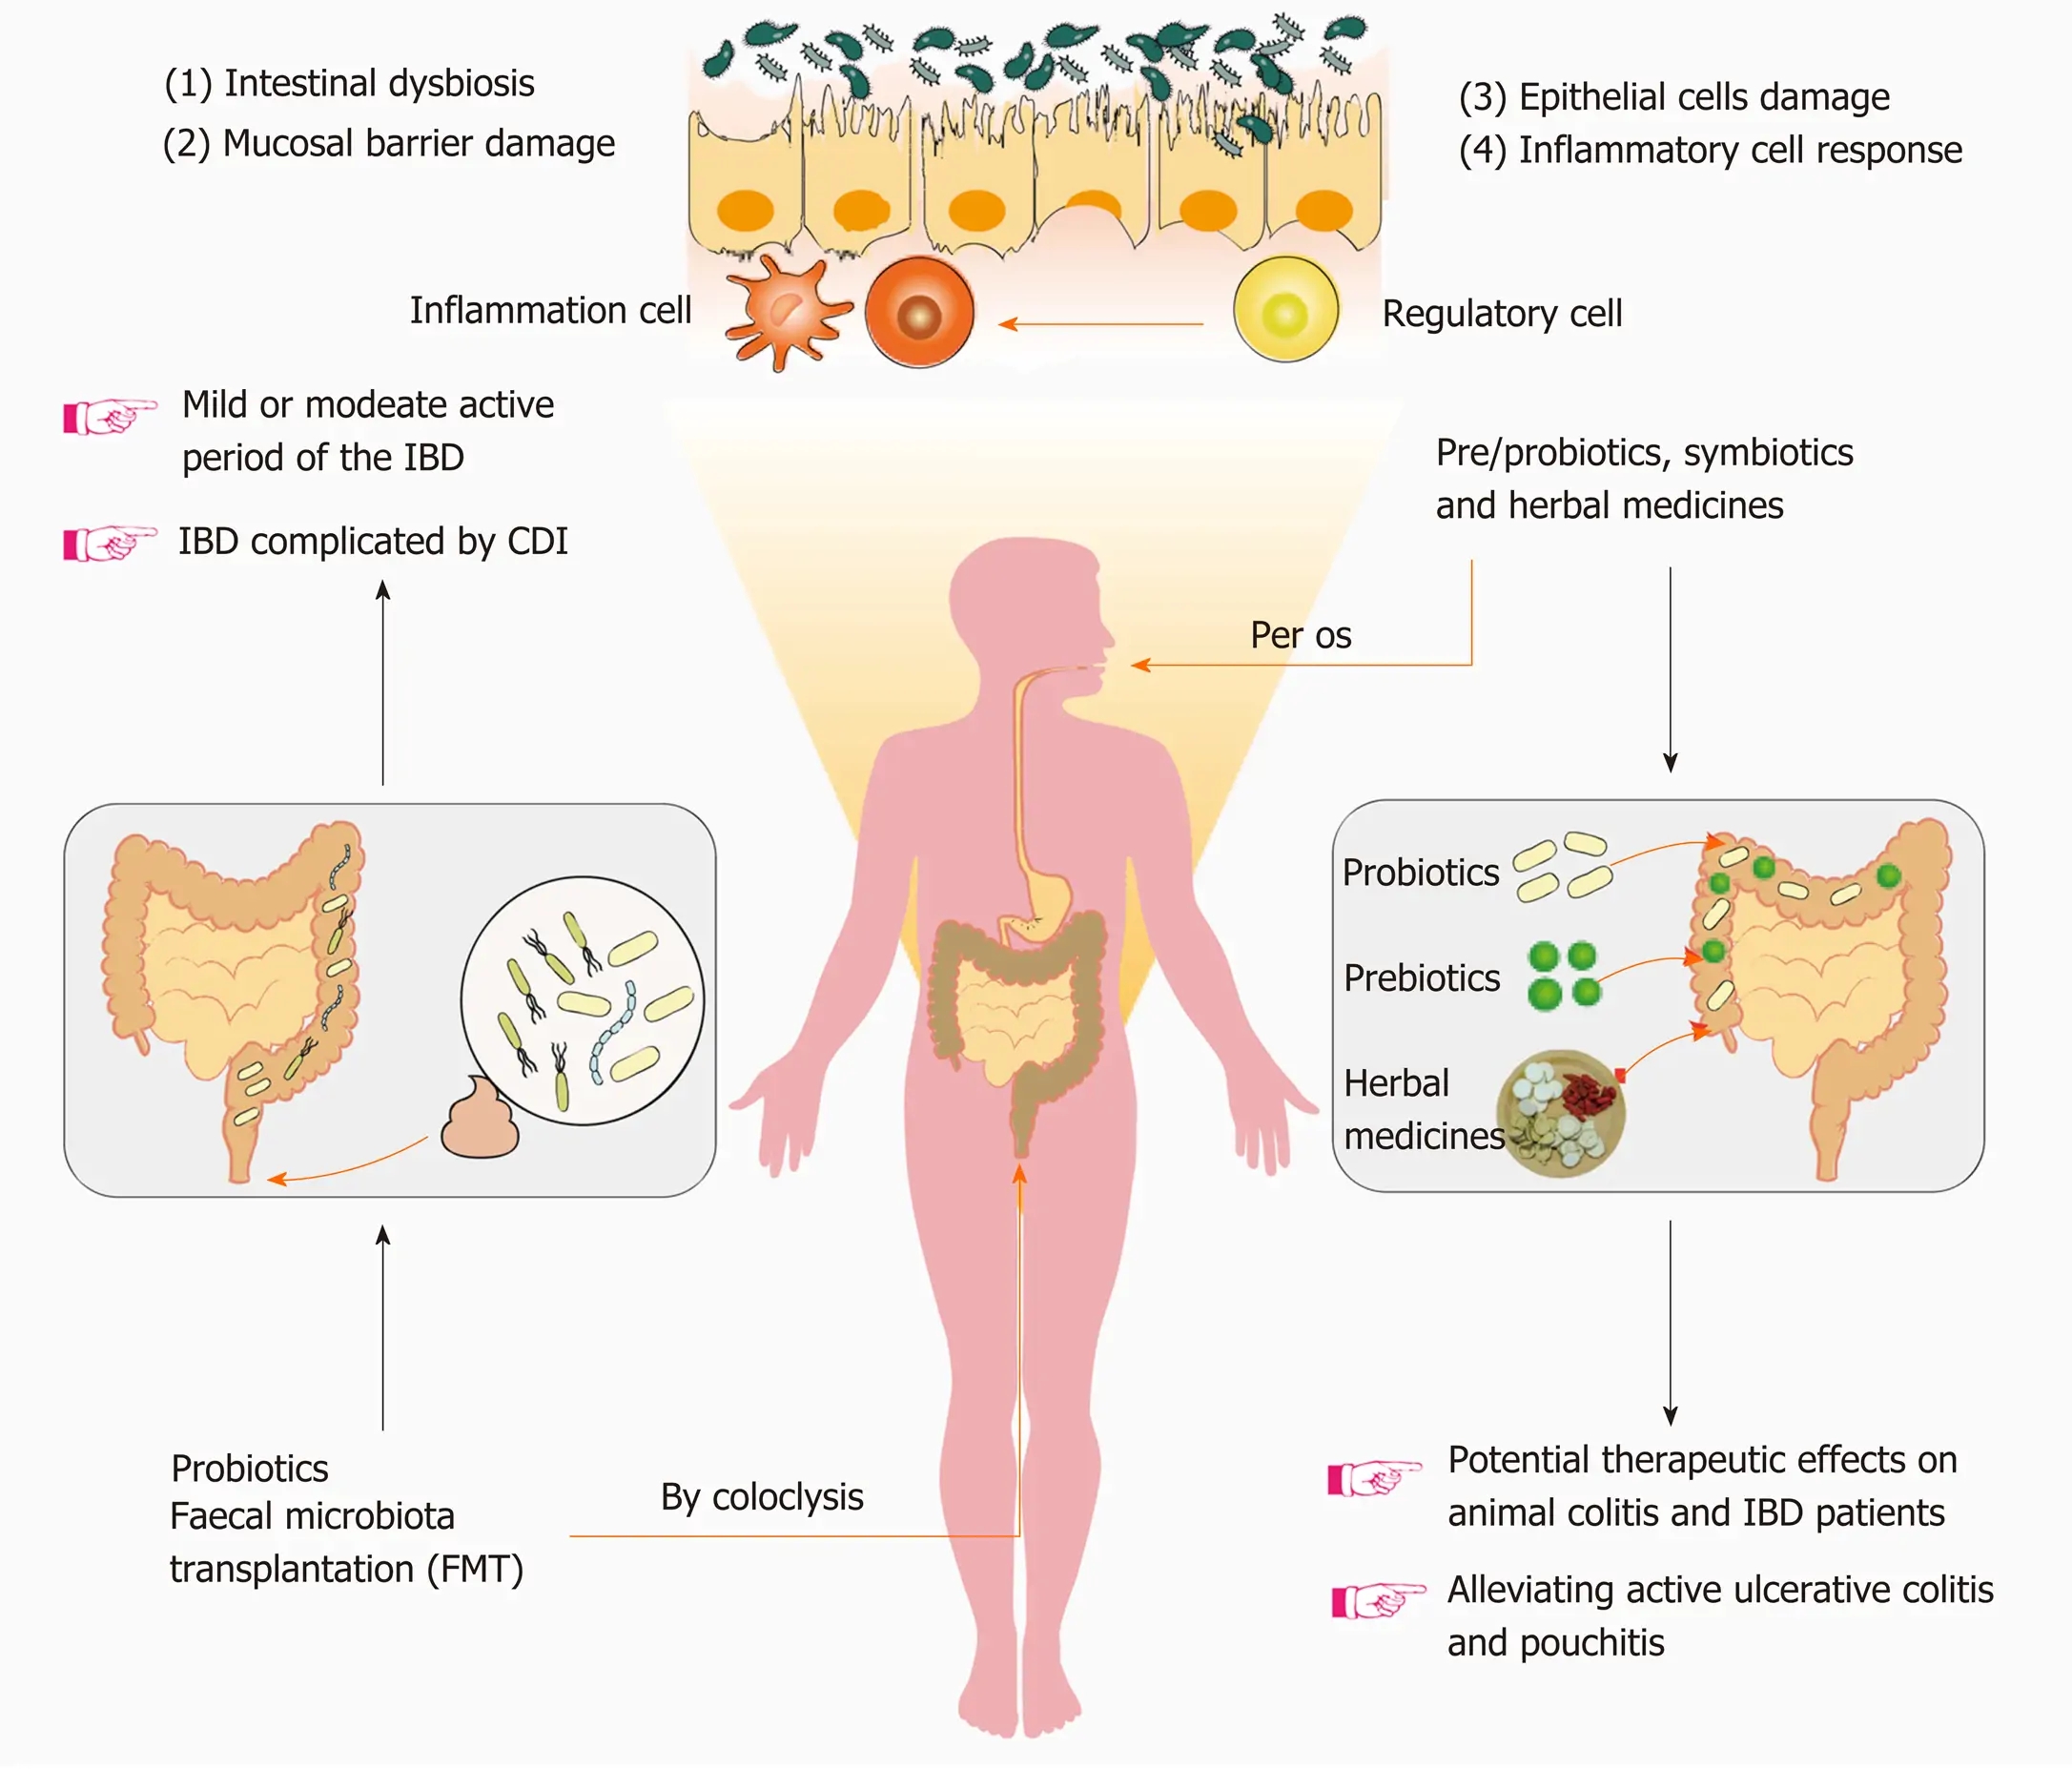 Regulation of the intestinal microbiota: An emerging therapeutic strategy for inflammatory bowel dis...